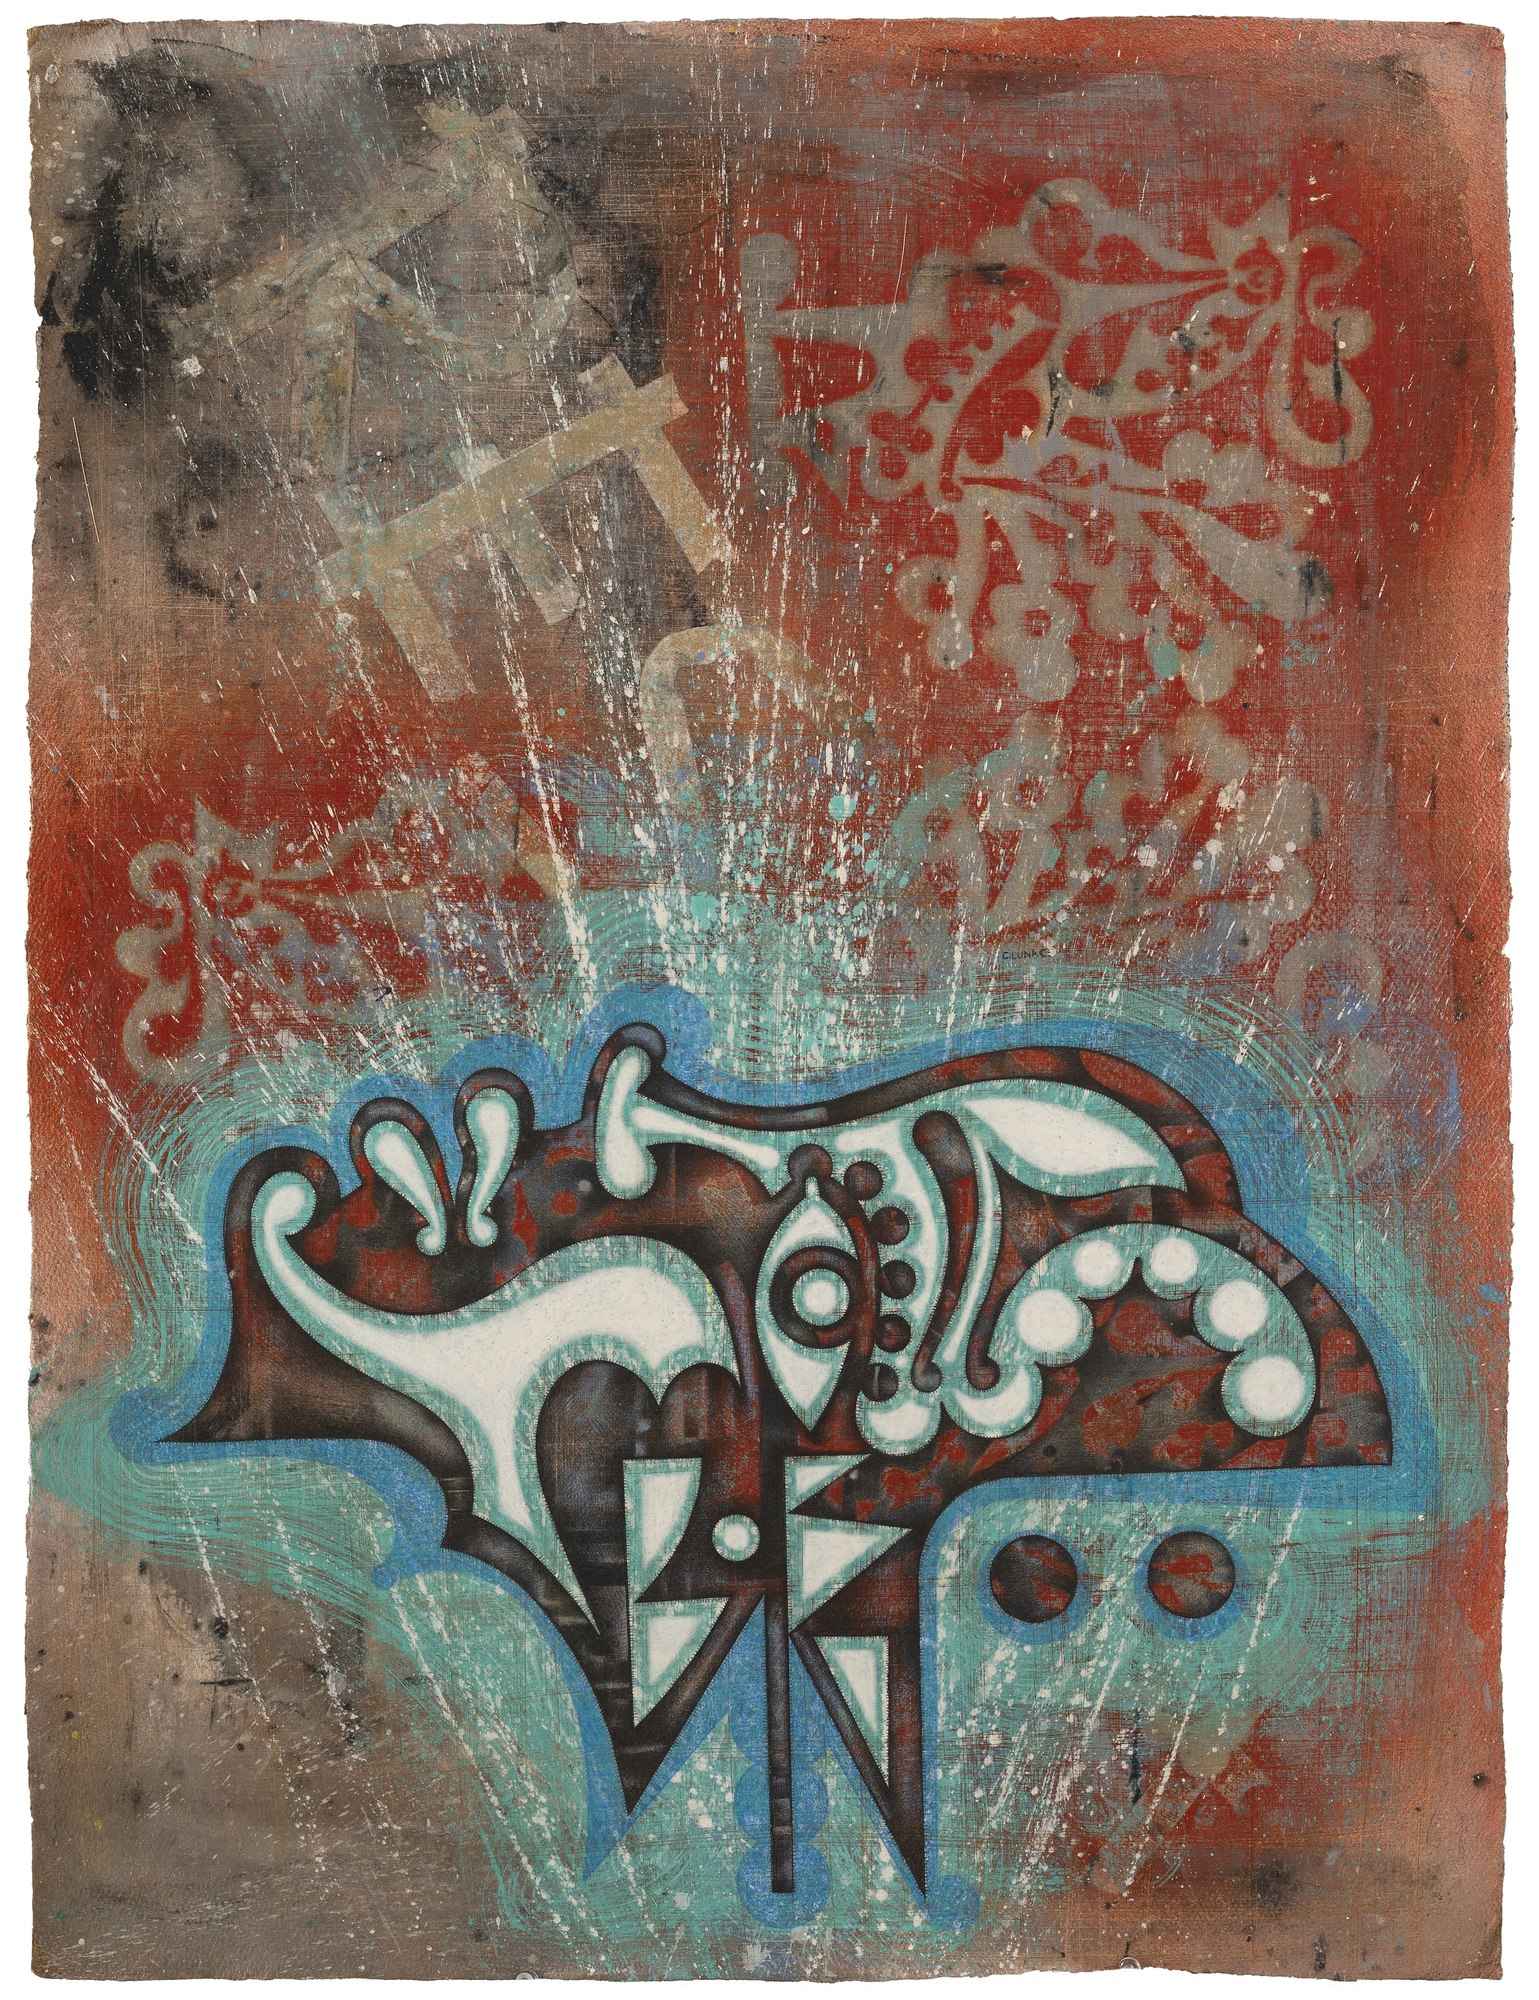 CARLOS LUNA - Untitled - mixed media on paper - 30 x 22 1/2 in.